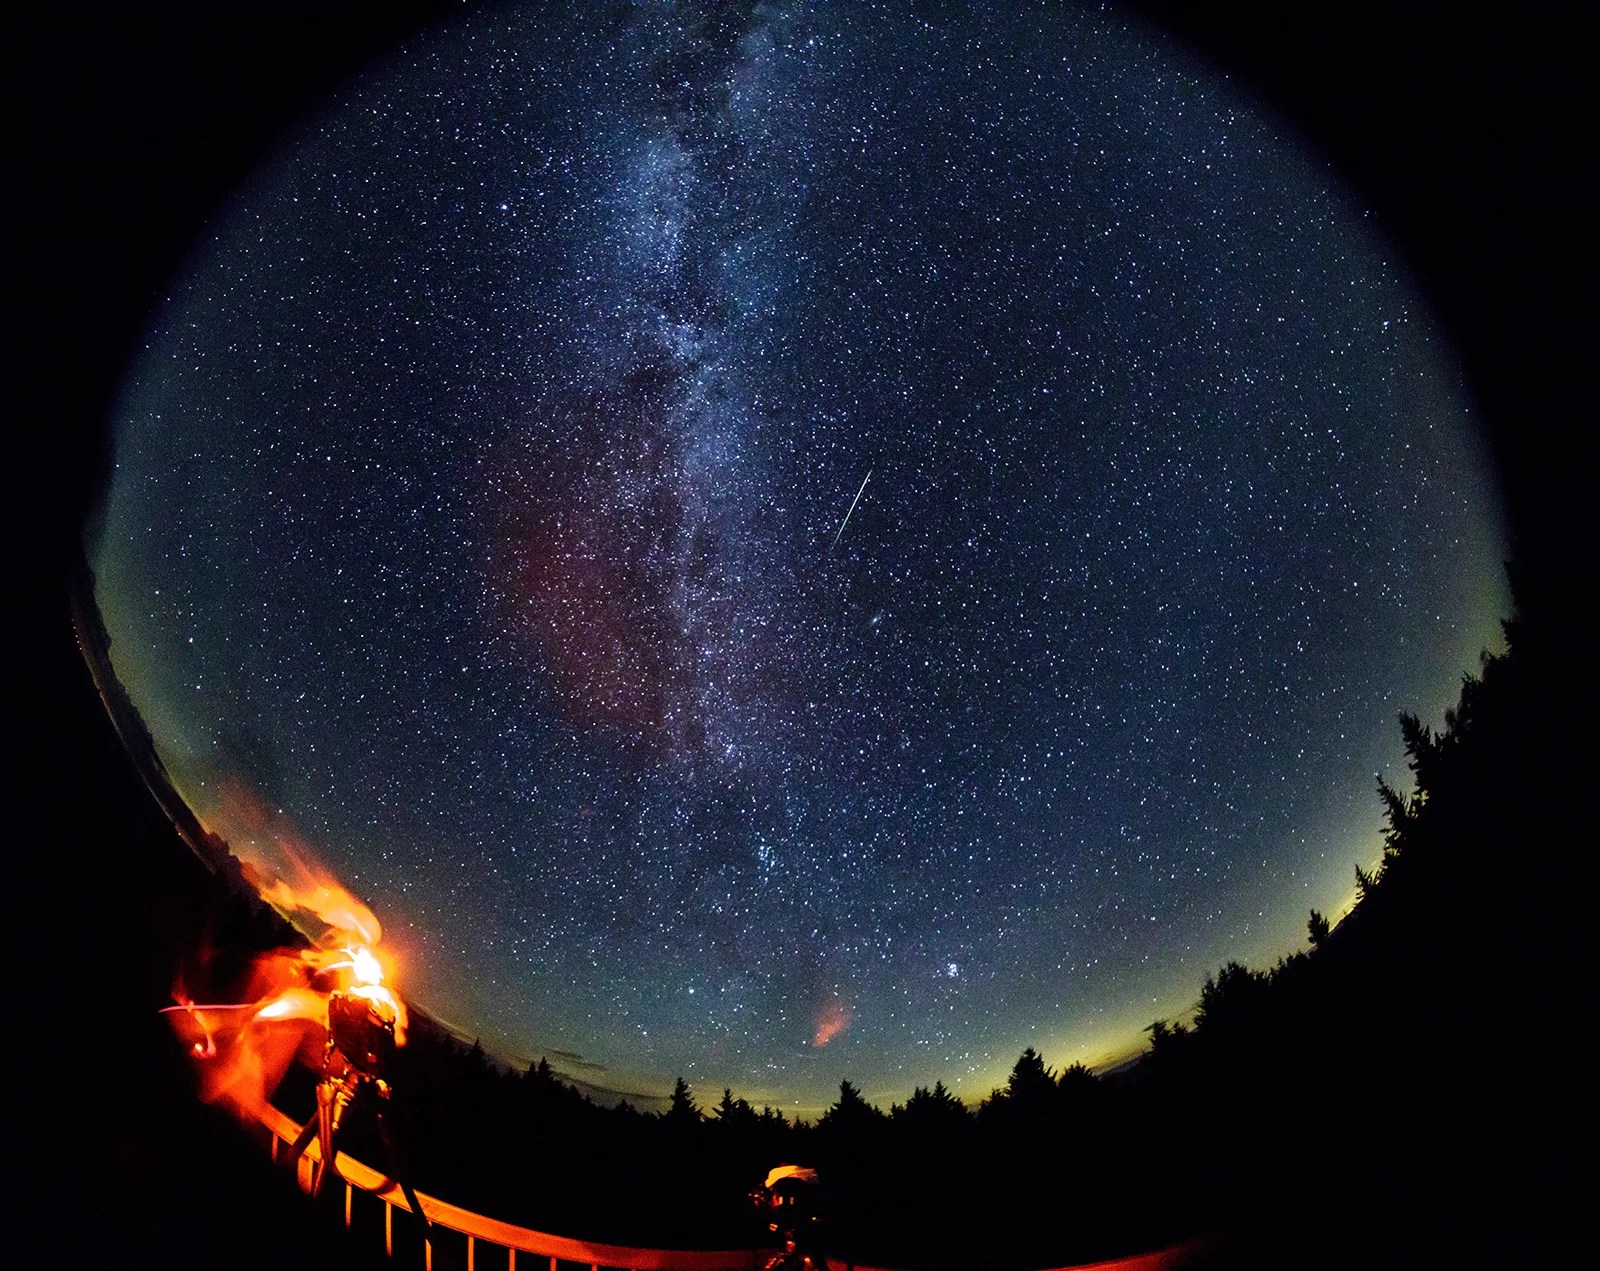 Meteor with Milky Way in the background.